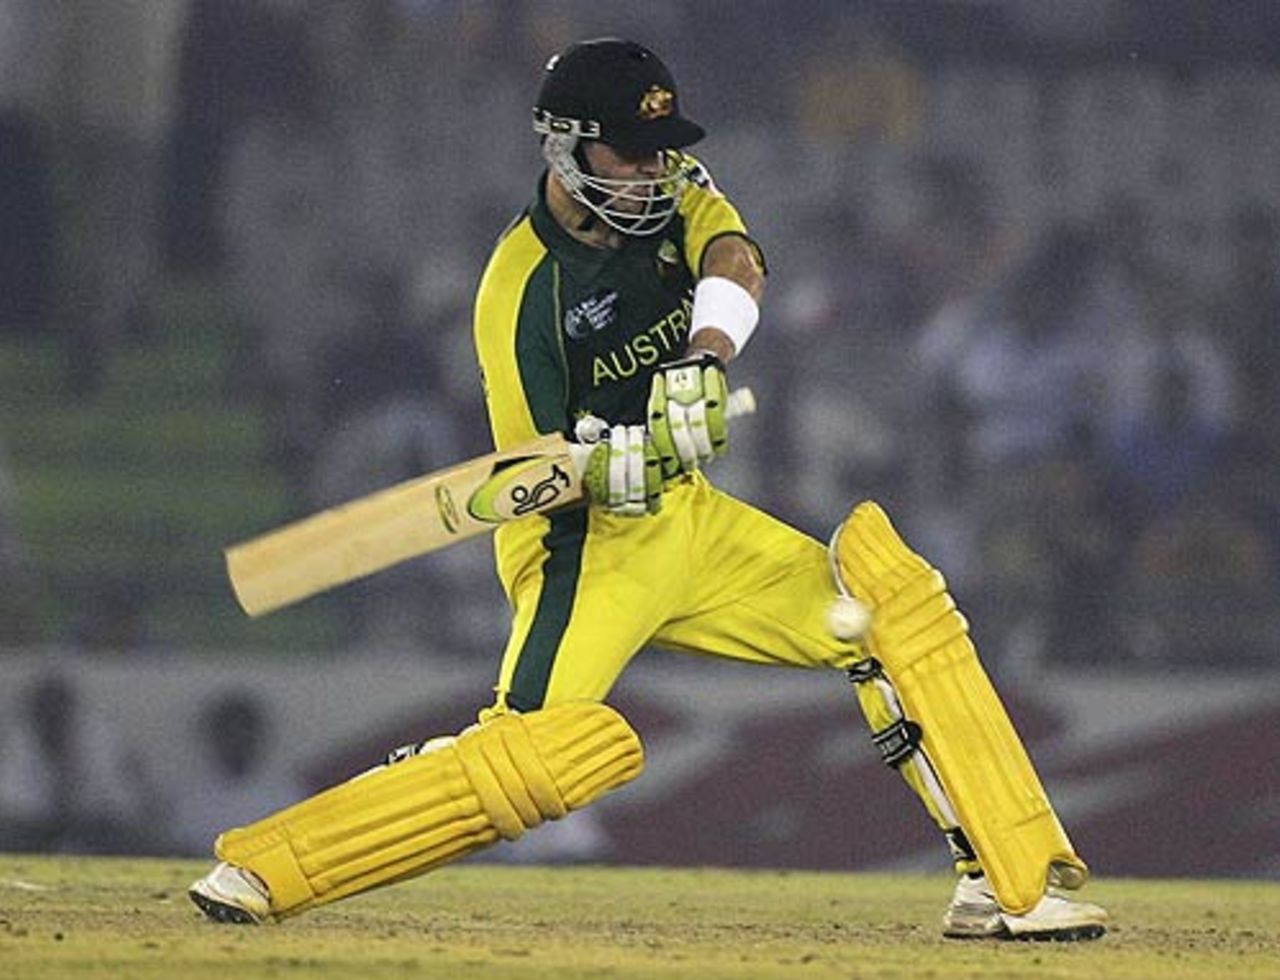 Damien Martyn cuts during his half-century, India v Australia, 18th match, Champions Trophy, October 29, 2007